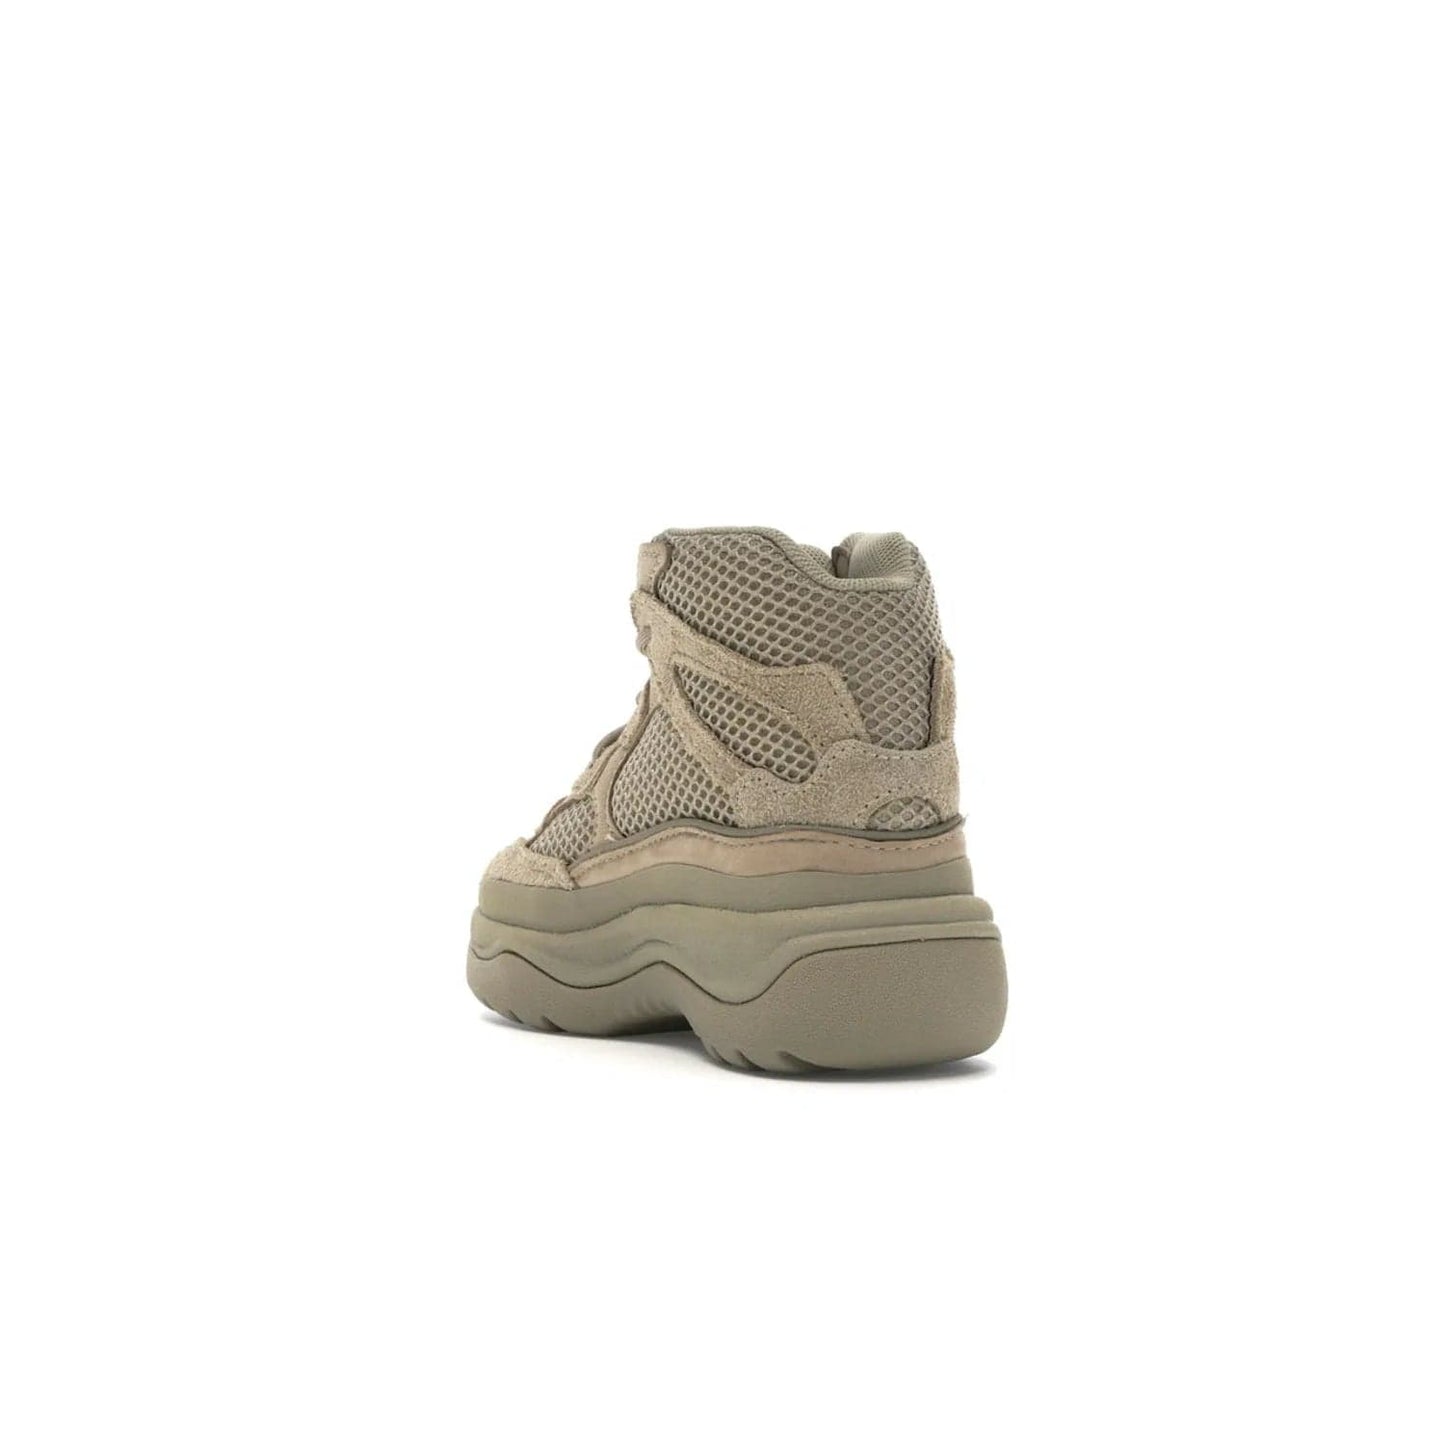 adidas Yeezy Desert Boot Rock (Kids) - Image 25 - Only at www.BallersClubKickz.com - Elevate your style this season with the adidas Yeezy Desert Boot Rock. Crafted from layered nylon and suede, this chic kids' silhouette features an EVA midsole and rubber outsole for superior cushioning and traction.